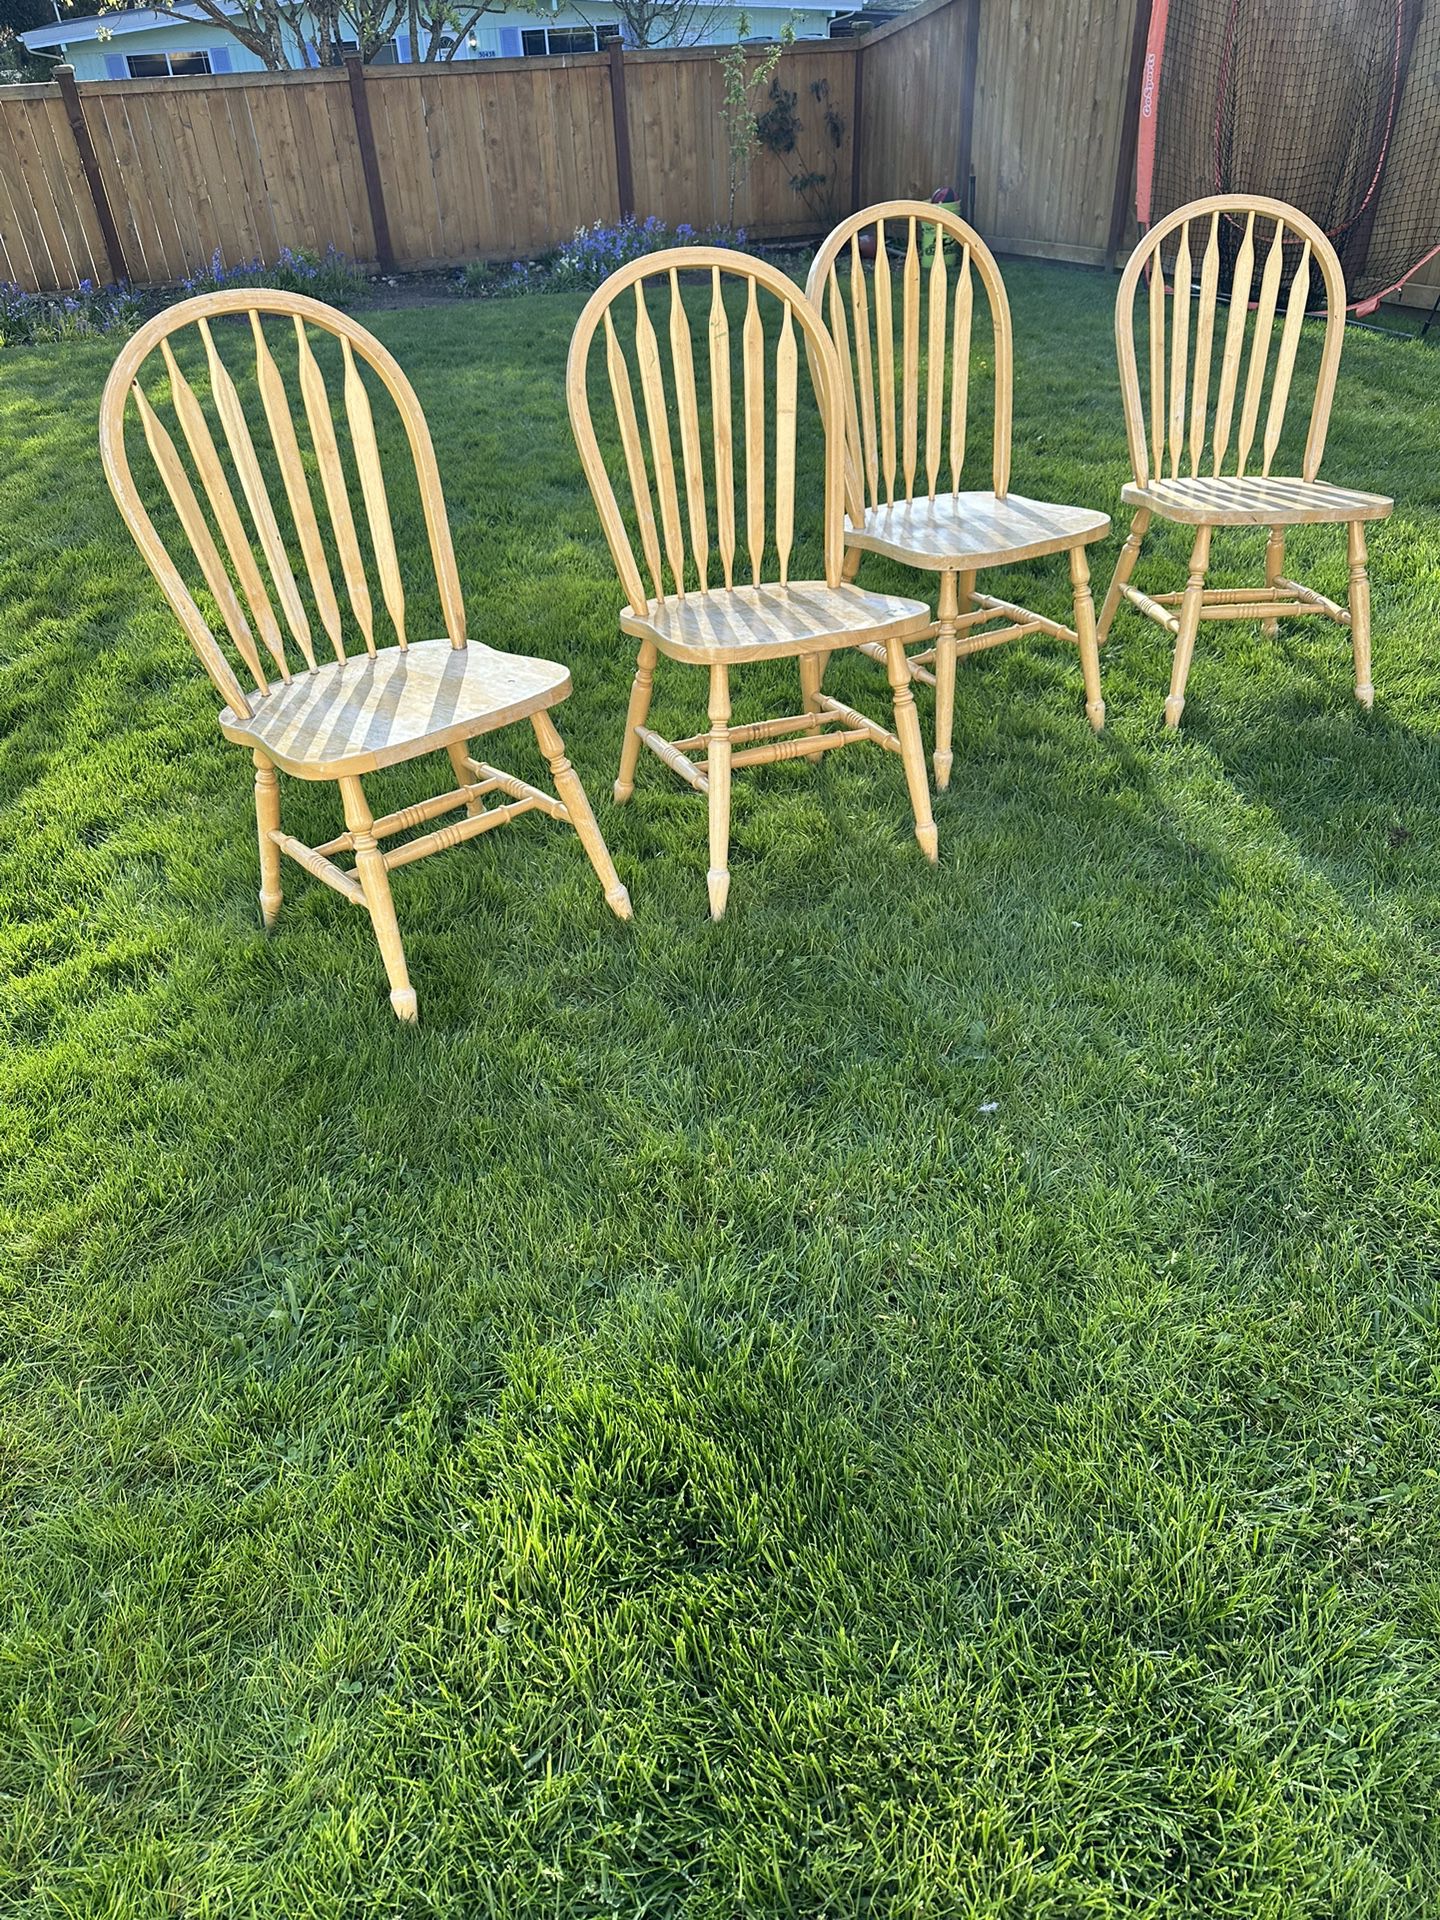 Four Free Chairs